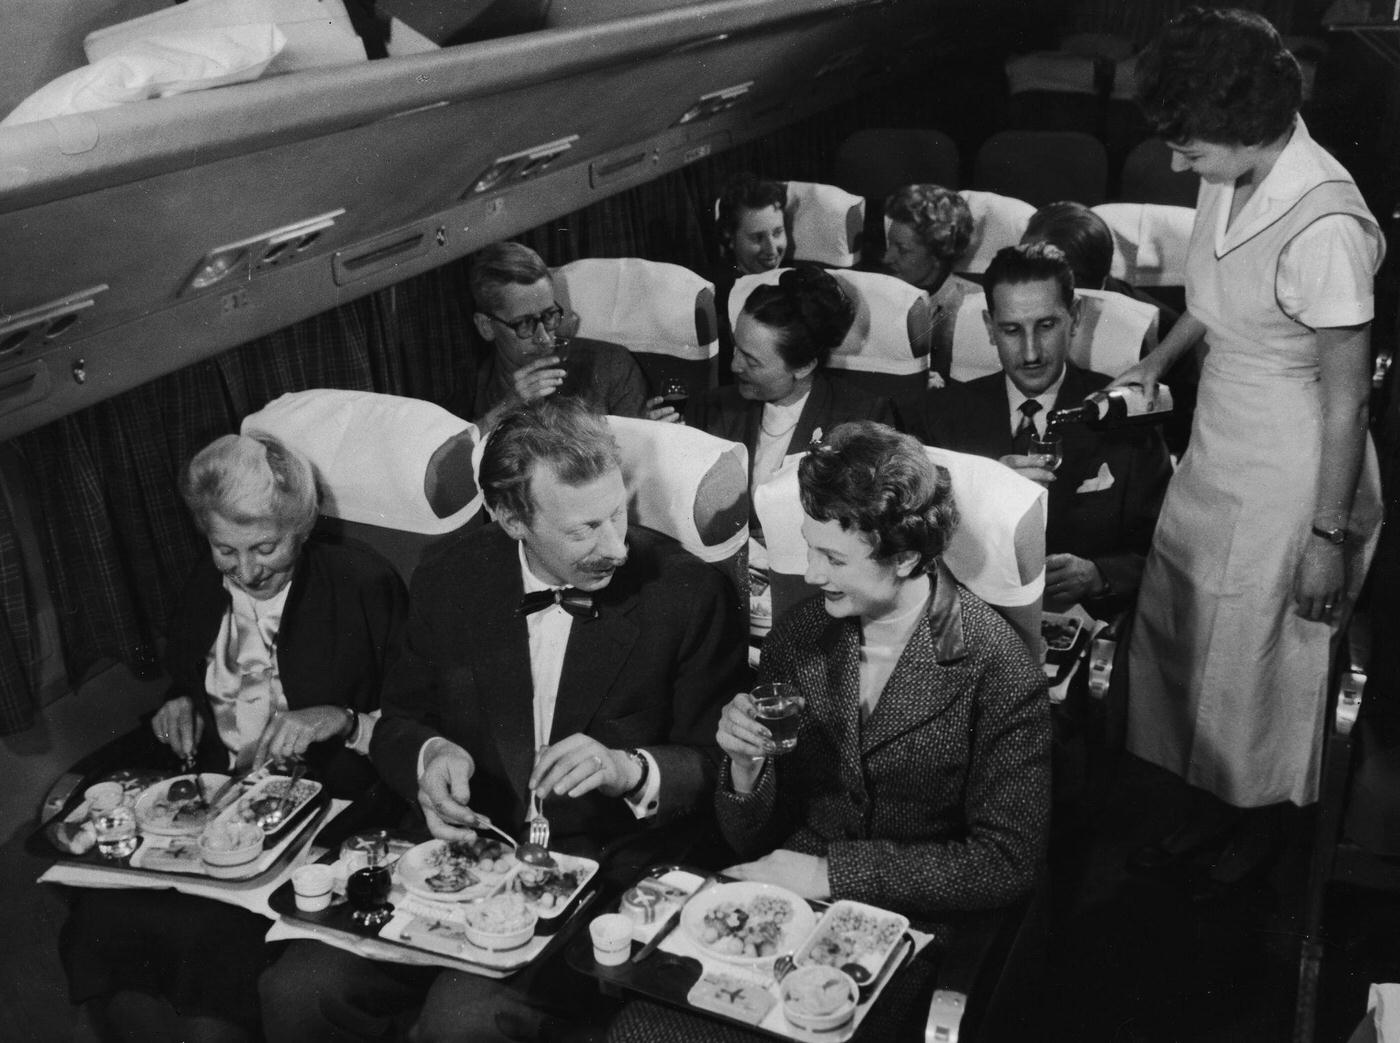 In the 1950s, an interior view of a commercial passenger plane shows a flight attendant pouring a glass of wine for a man who sits next to a couple who are toasting each other with full glasses.